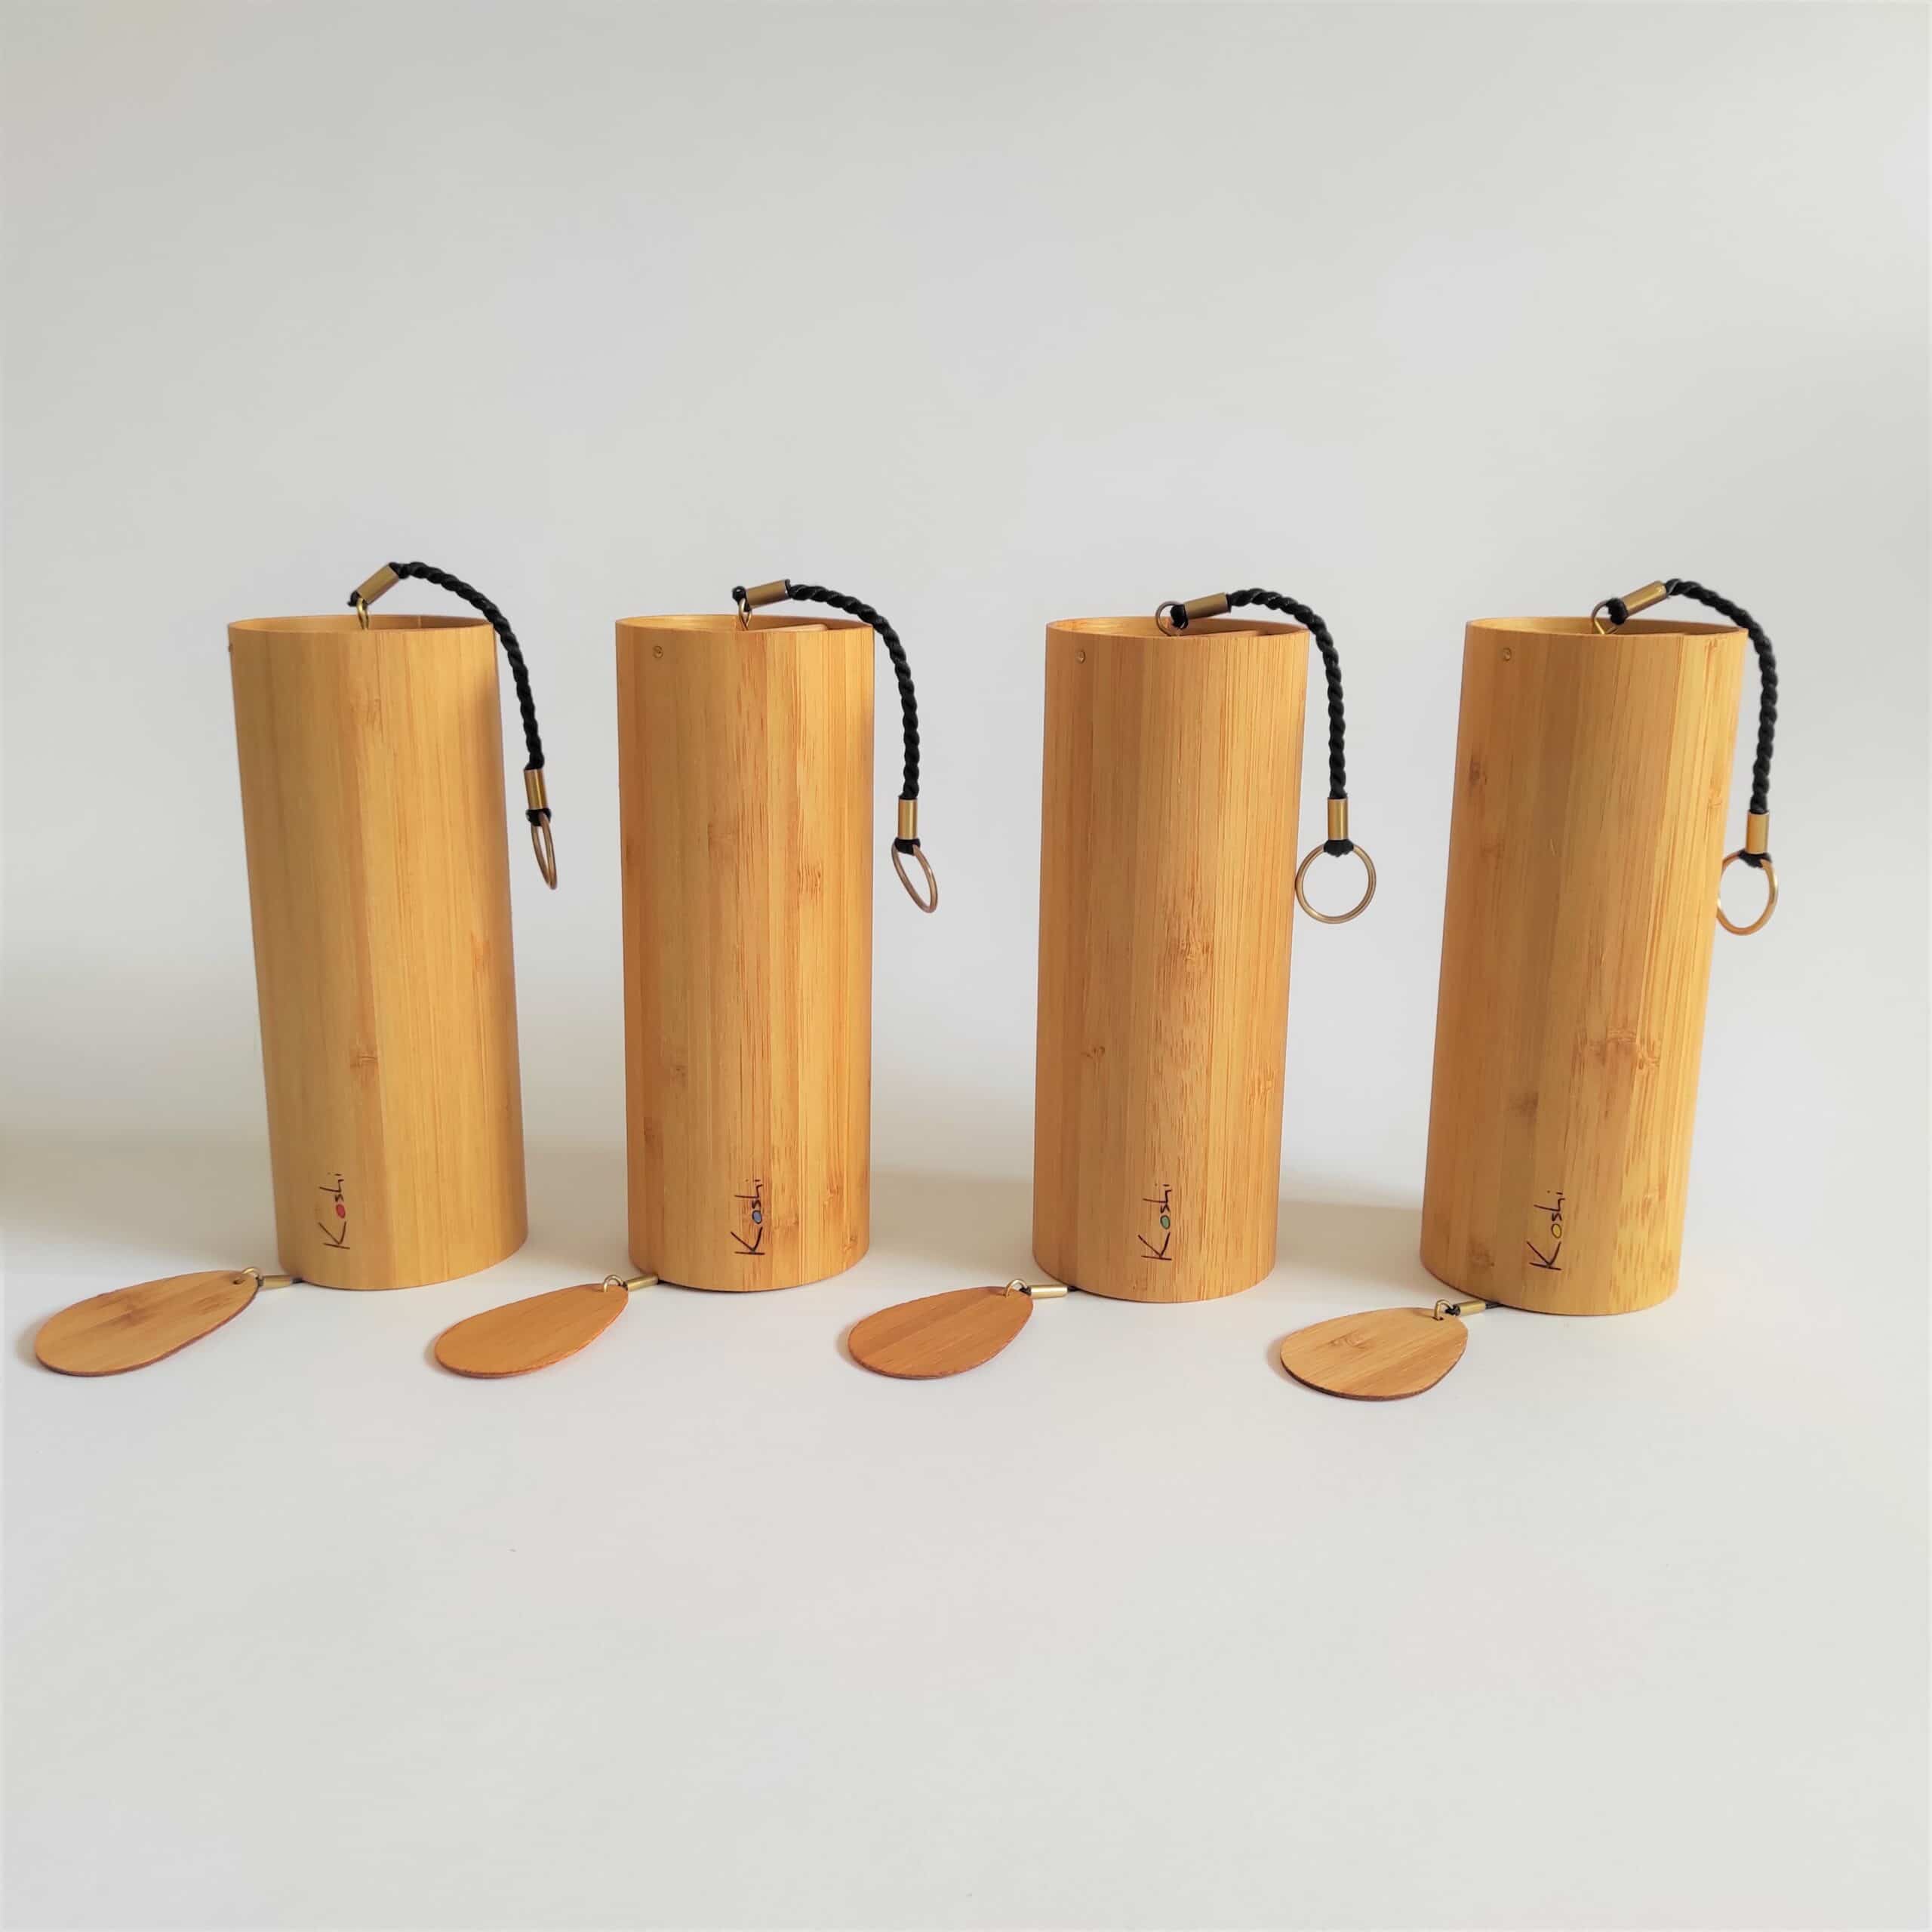 Chimes Koshi set of 4 elements in a box | Family Relax